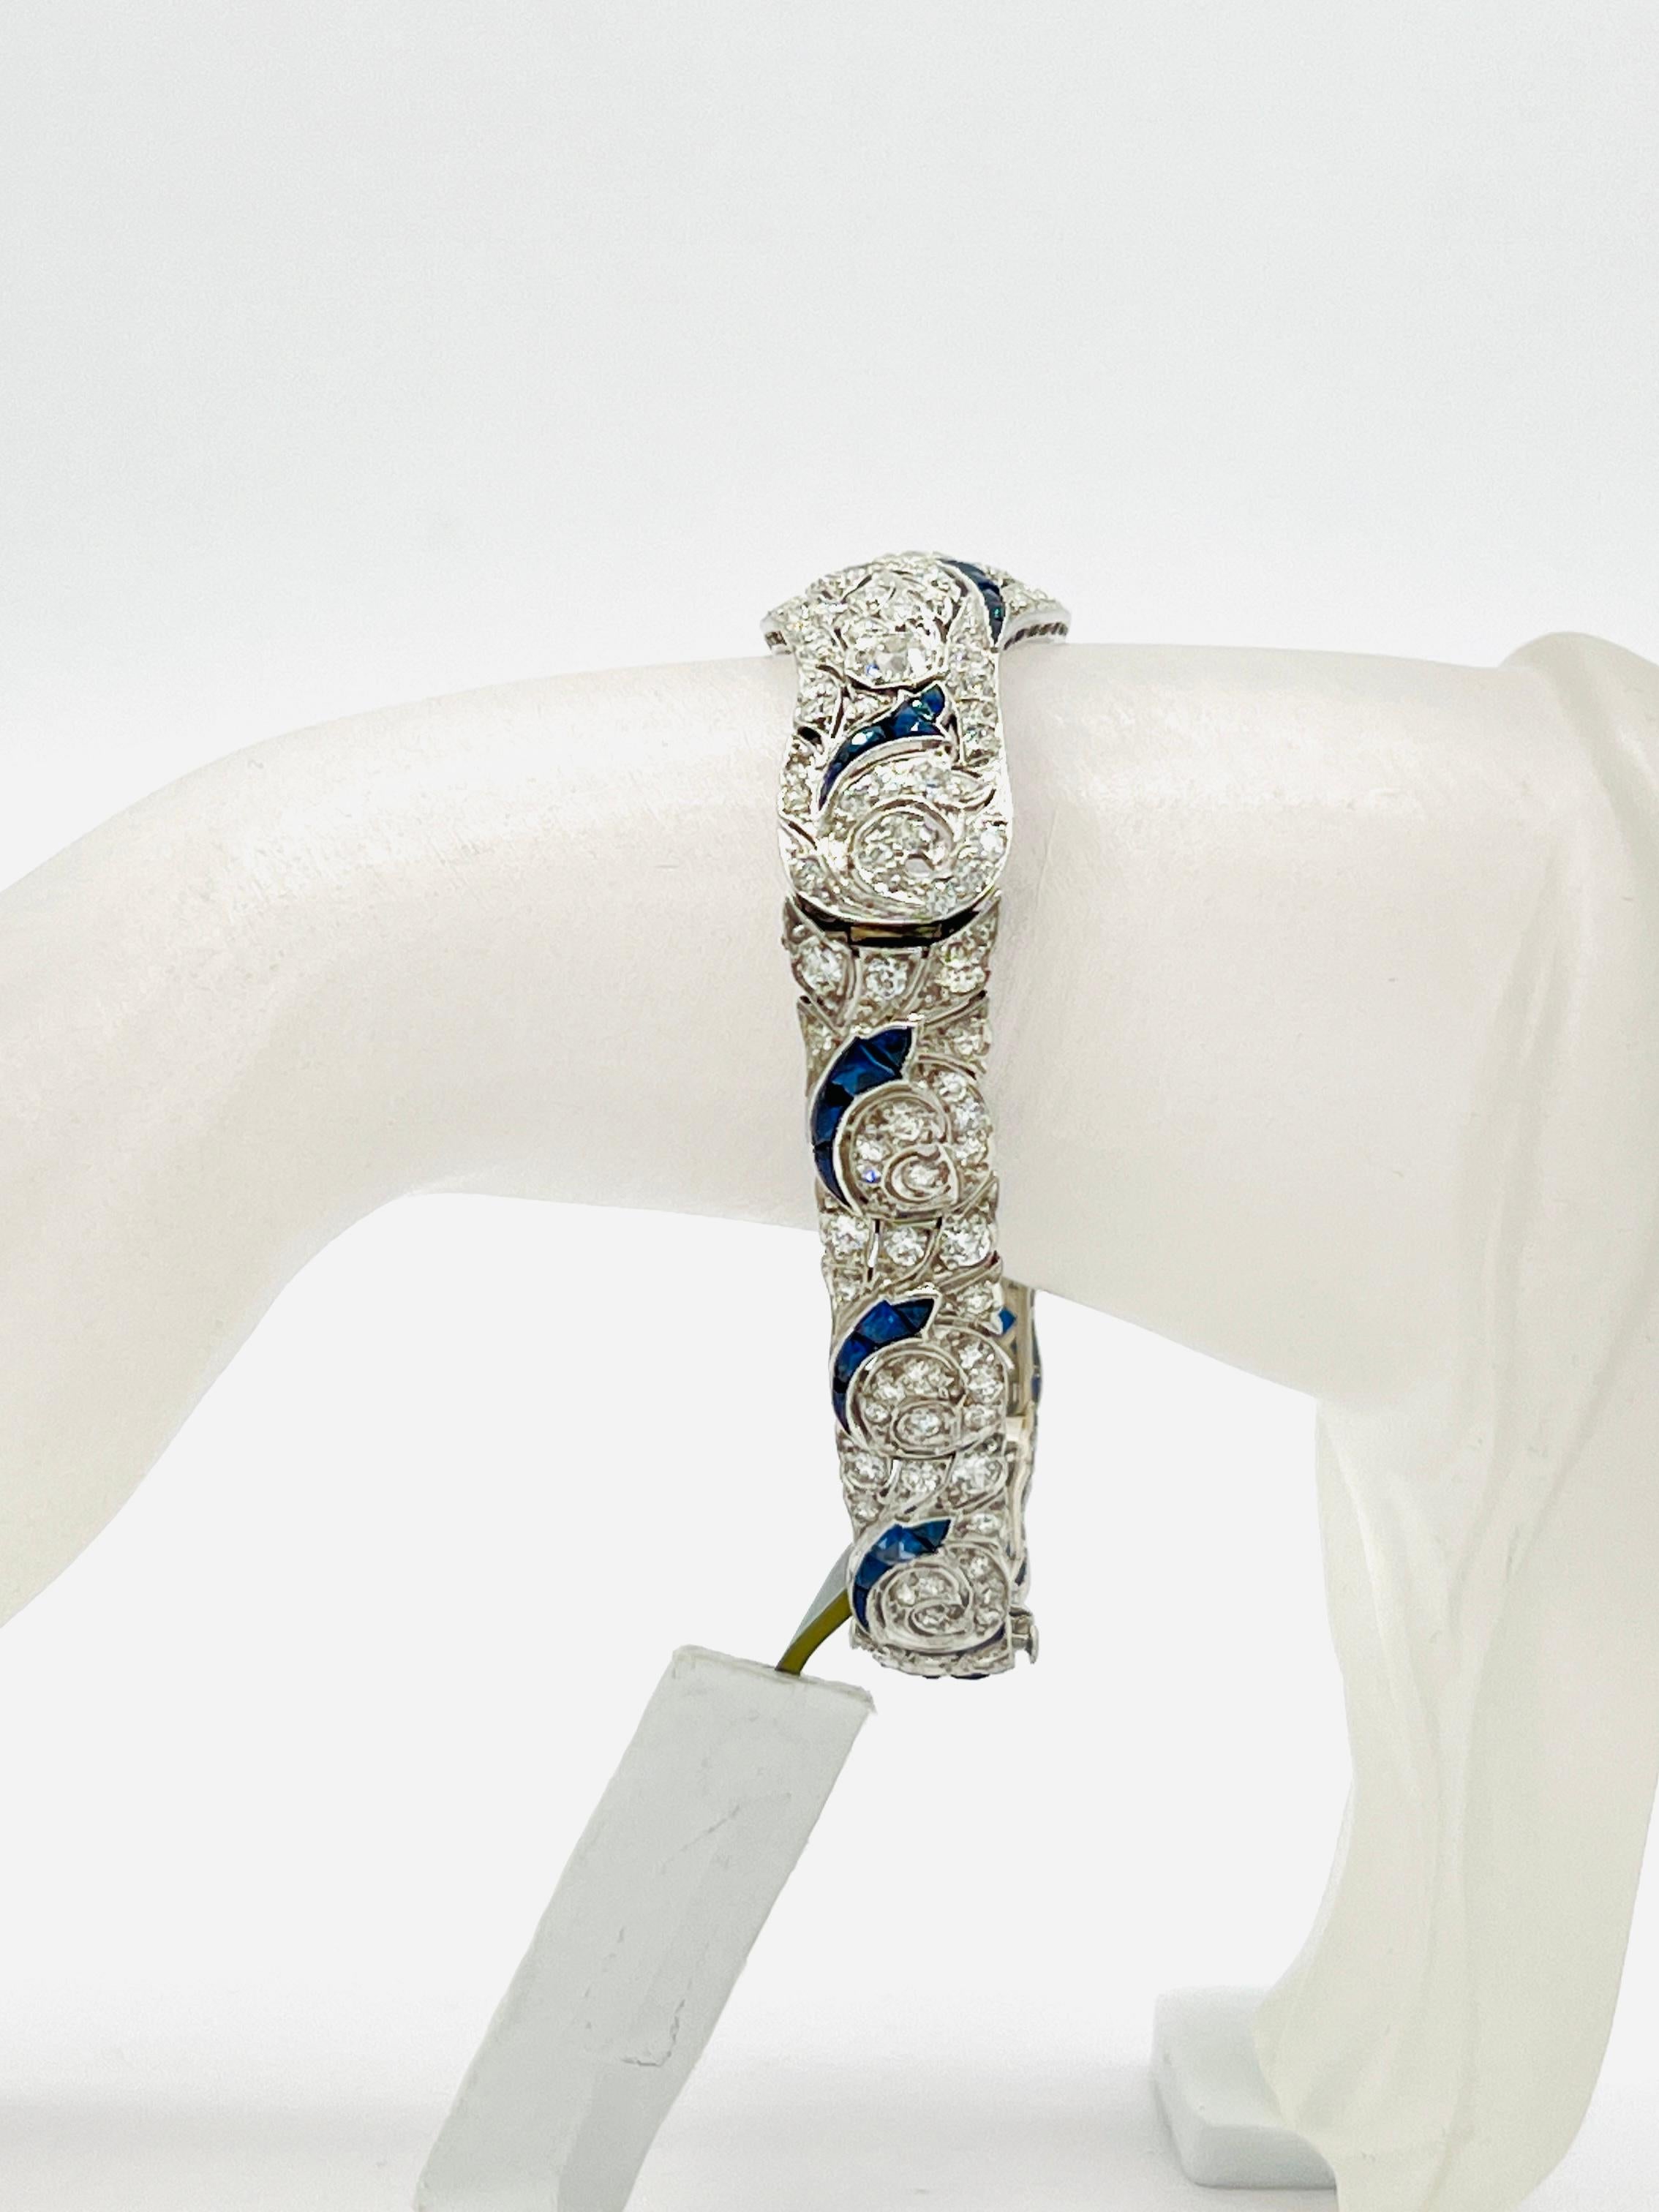 Stunning bracelet with a 1.40 ct. white diamond round center stone and 10.70 ct. blue sapphire and white diamond rounds.  Handmade in 18k white gold.  This piece would be a great addition to any fine jewelry collection!